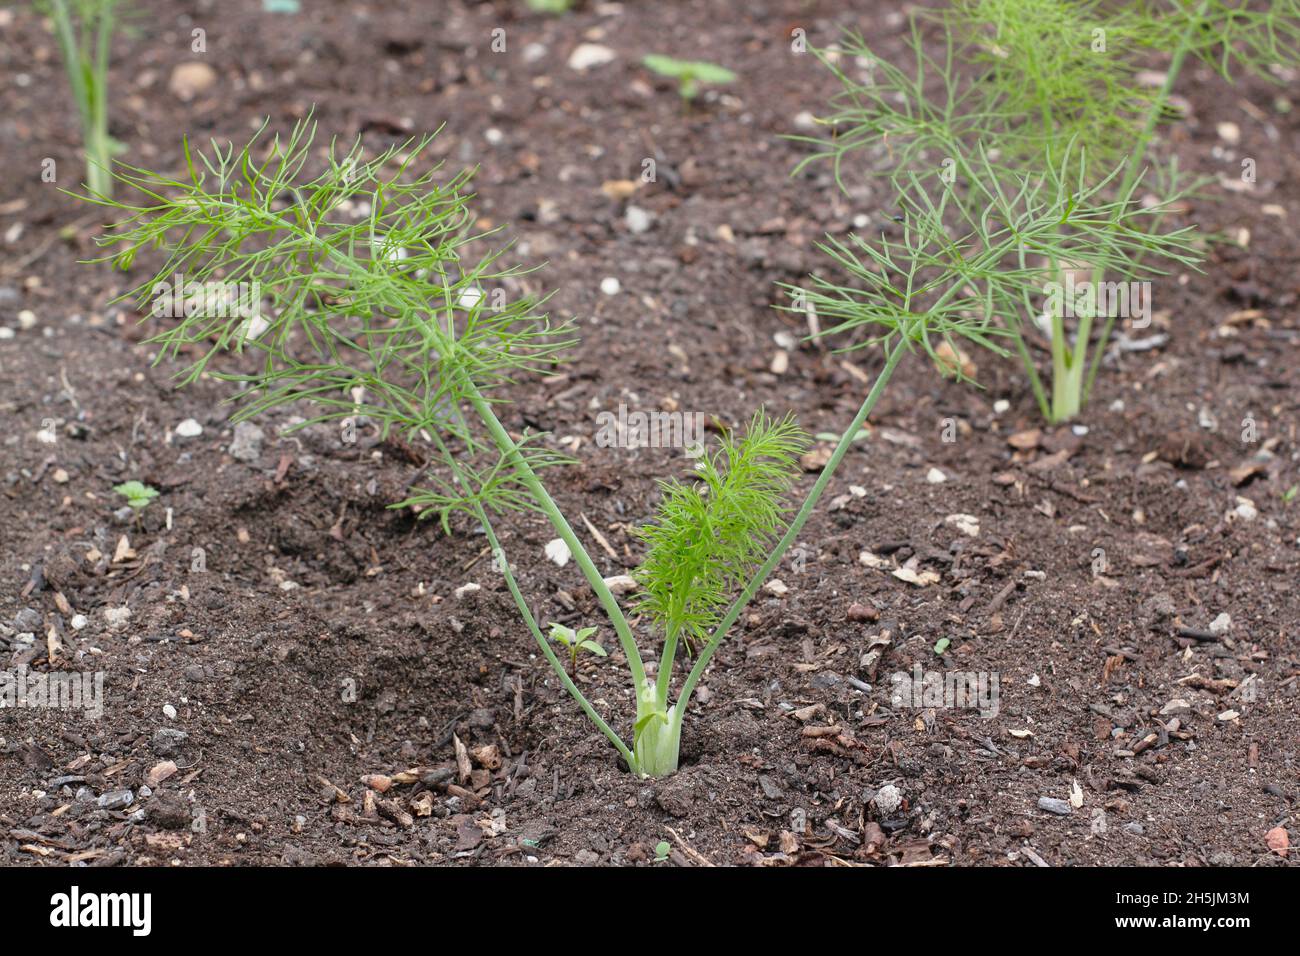 Montebianco fennel seedlings. Young fennel plants evenly spaced growing in a UK veg plot Stock Photo